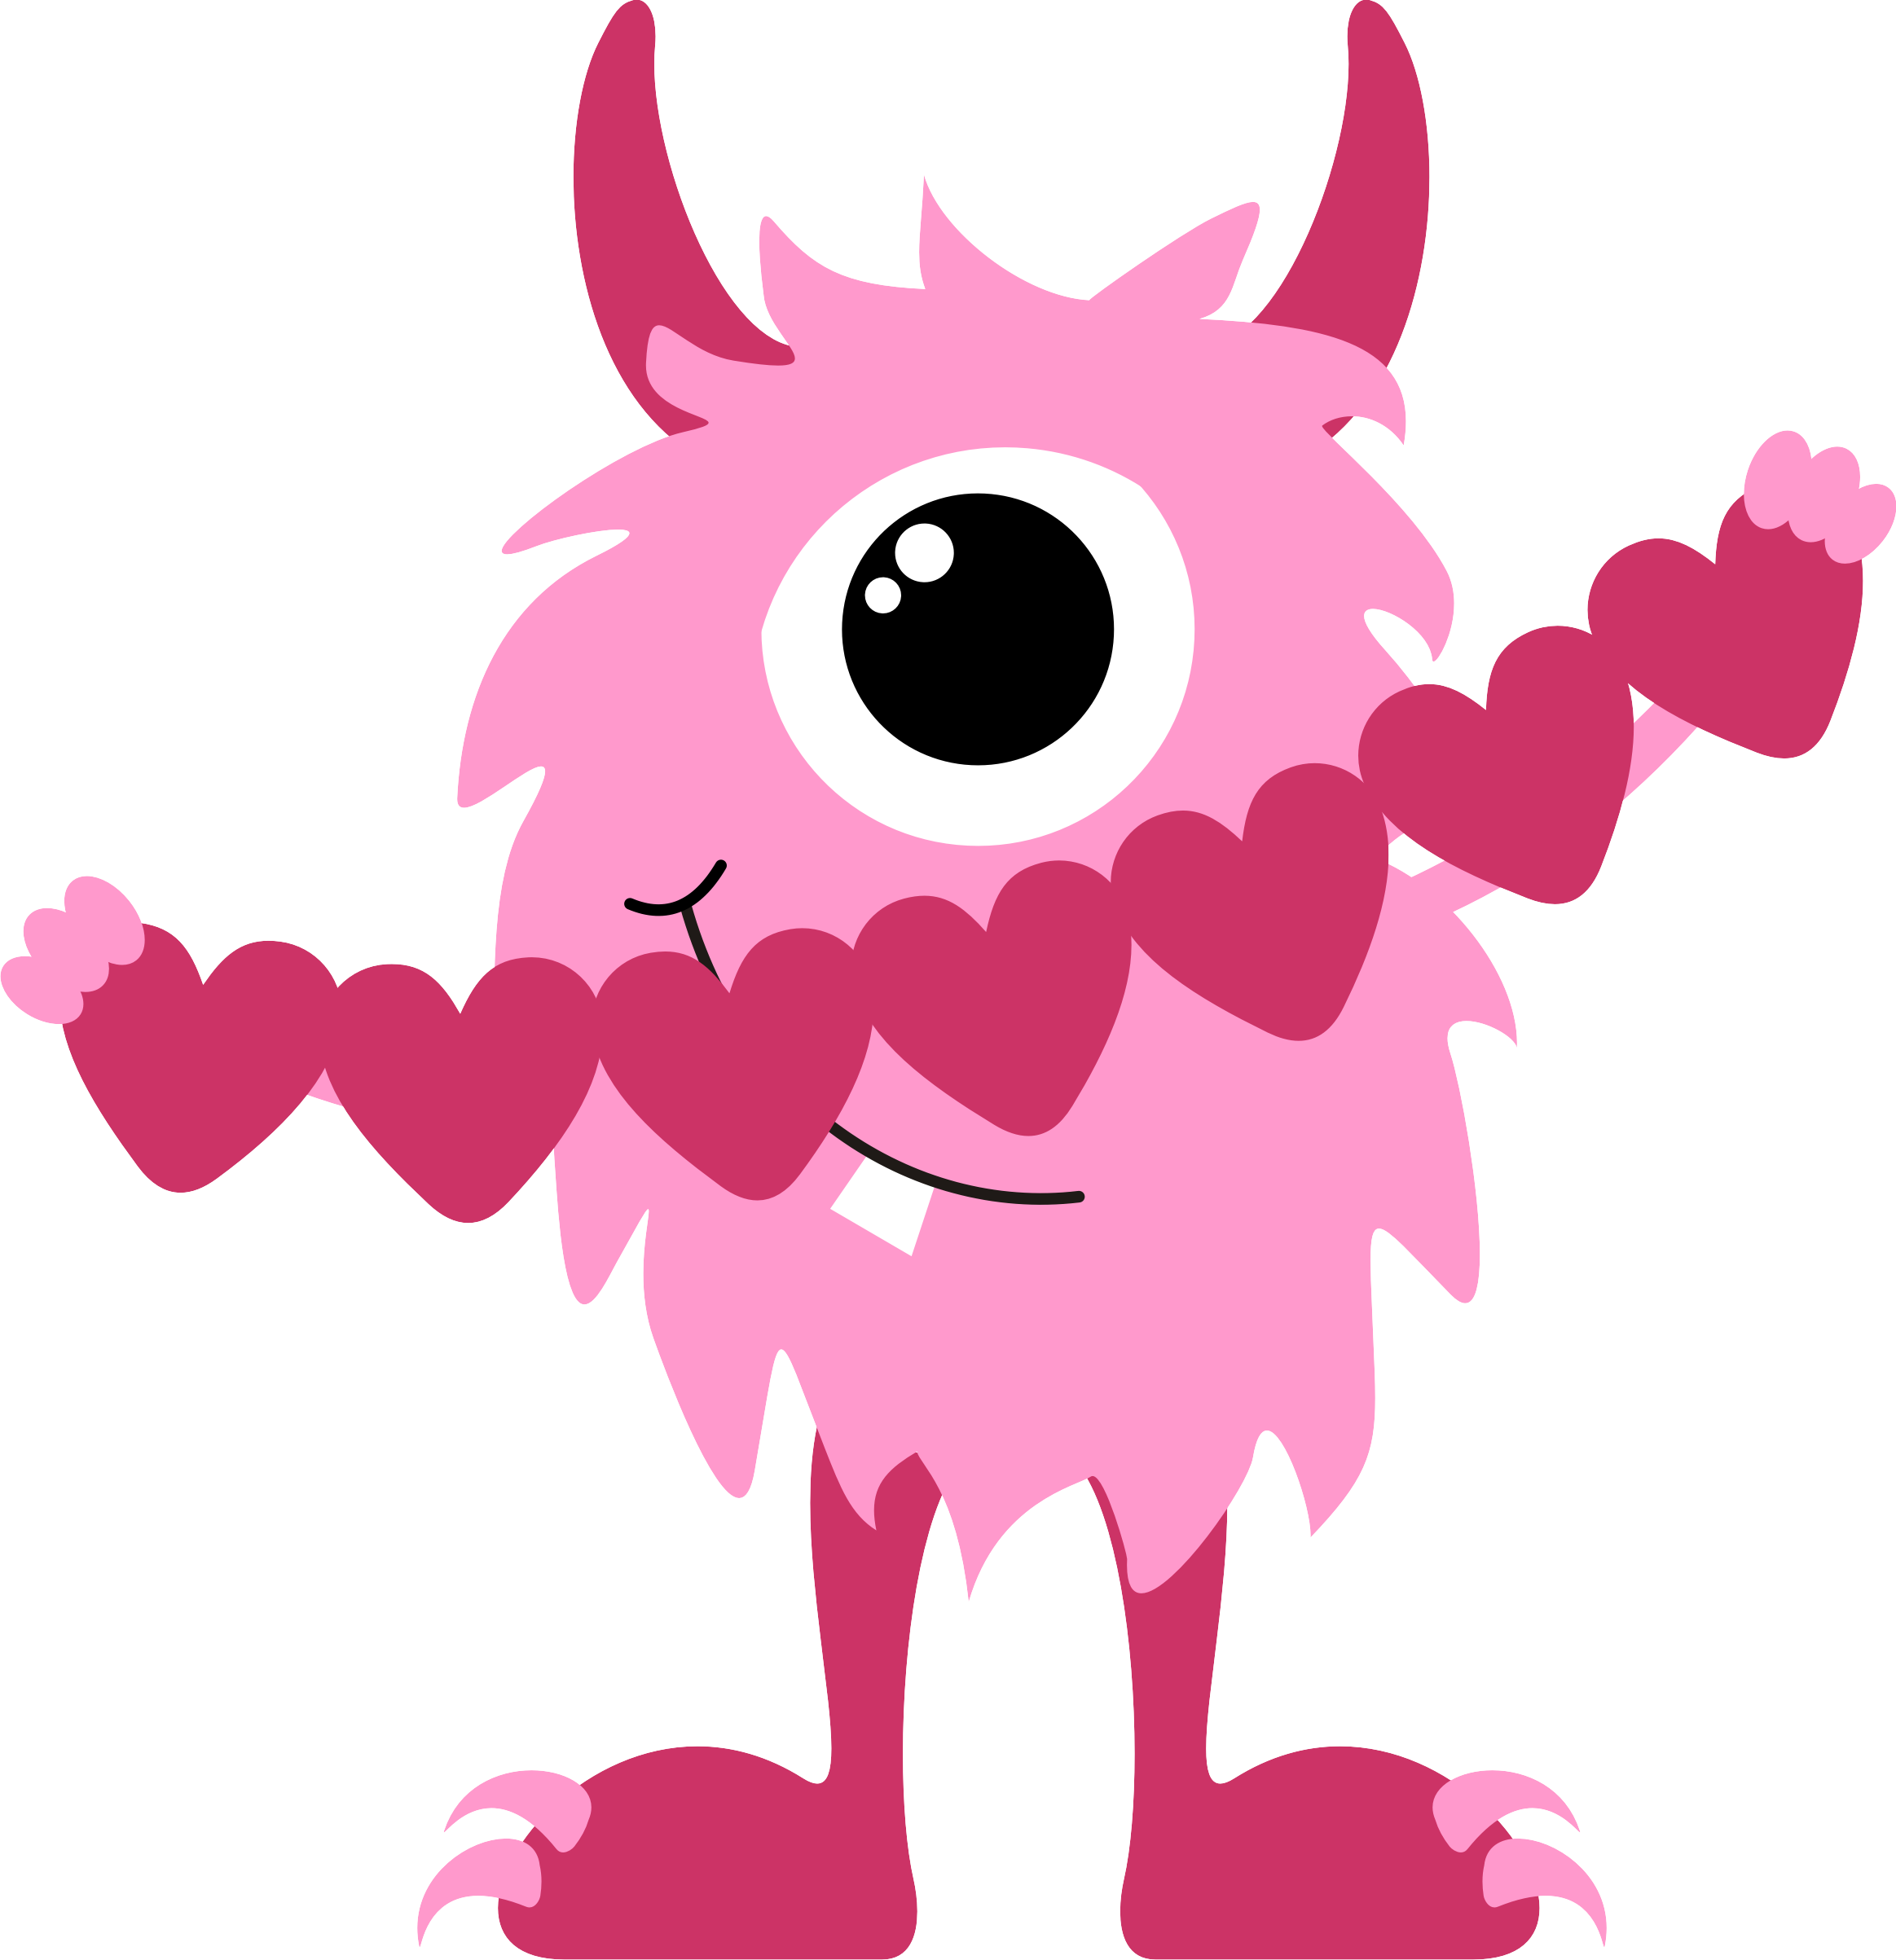 clipart candy monster